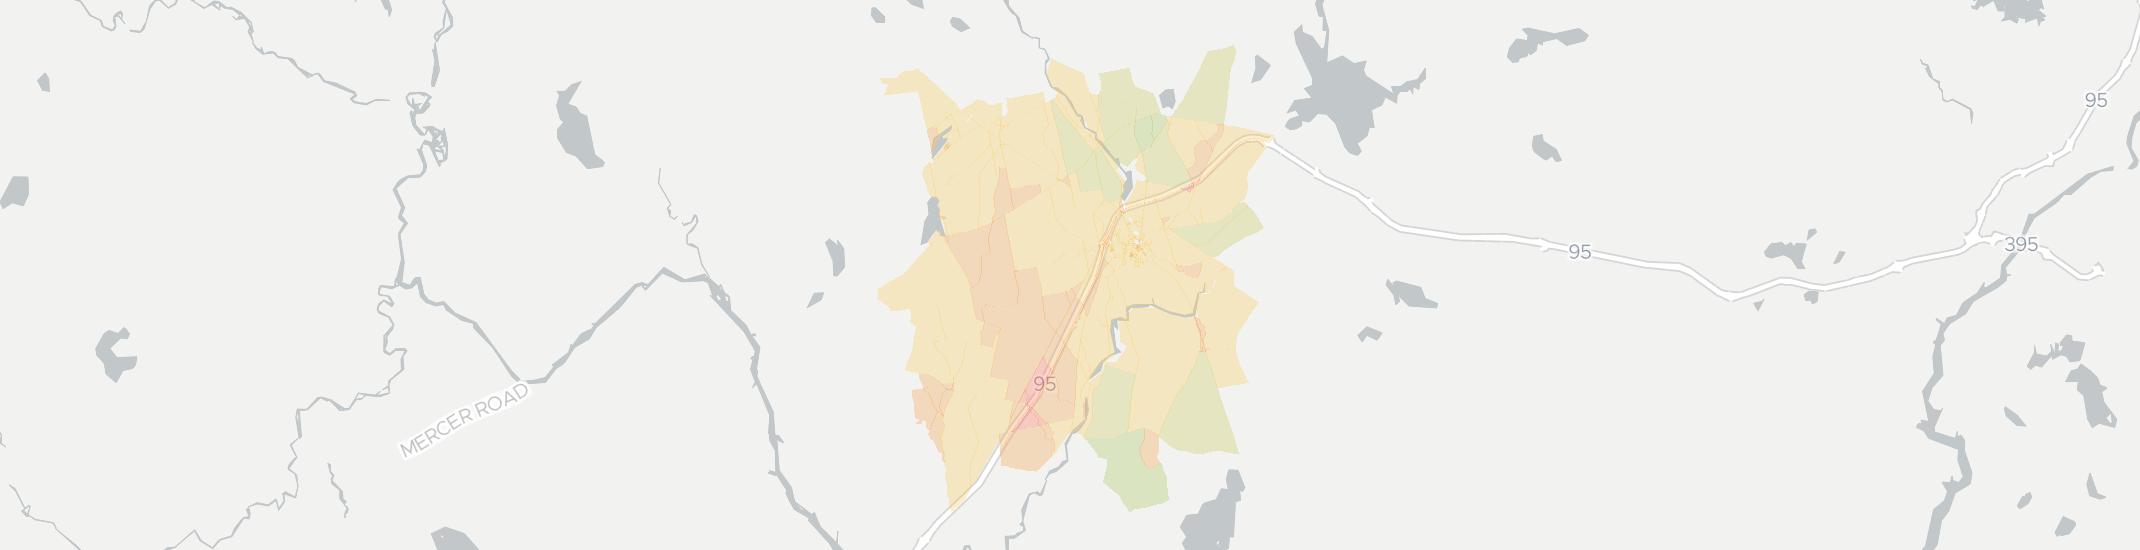 Pittsfield Internet Competition Map. Click for interactive map.